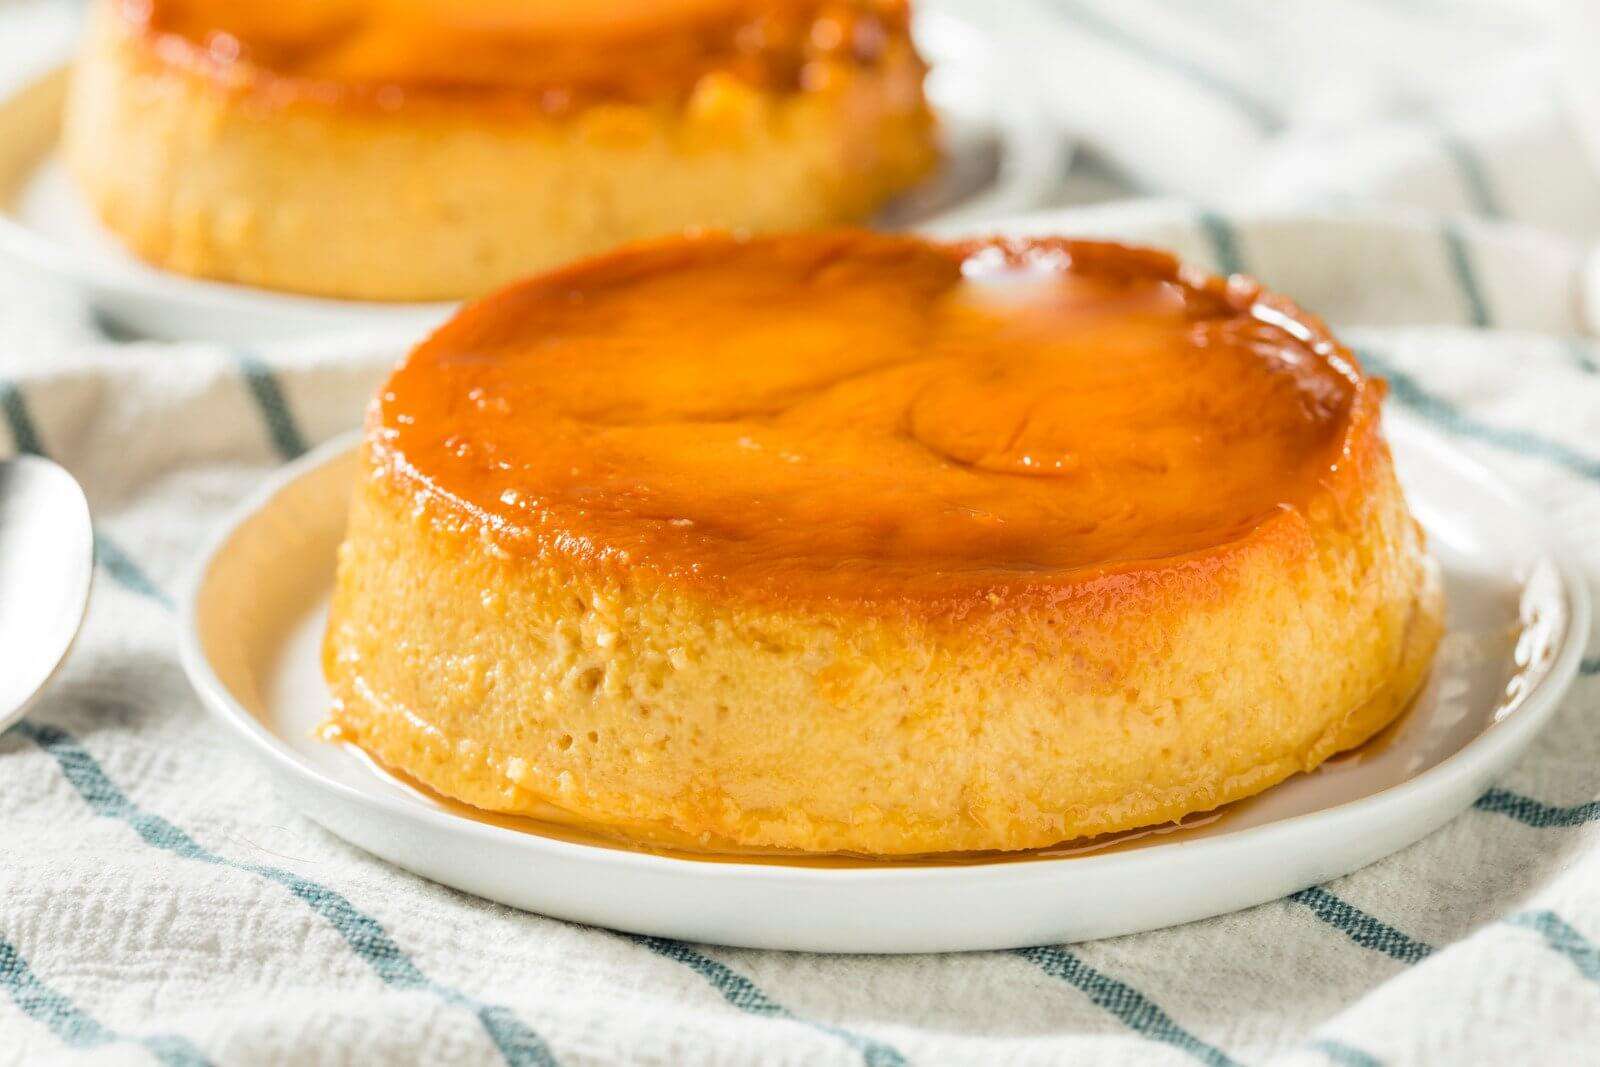 What Does Overcooked and Undercooked Flan Look Like?